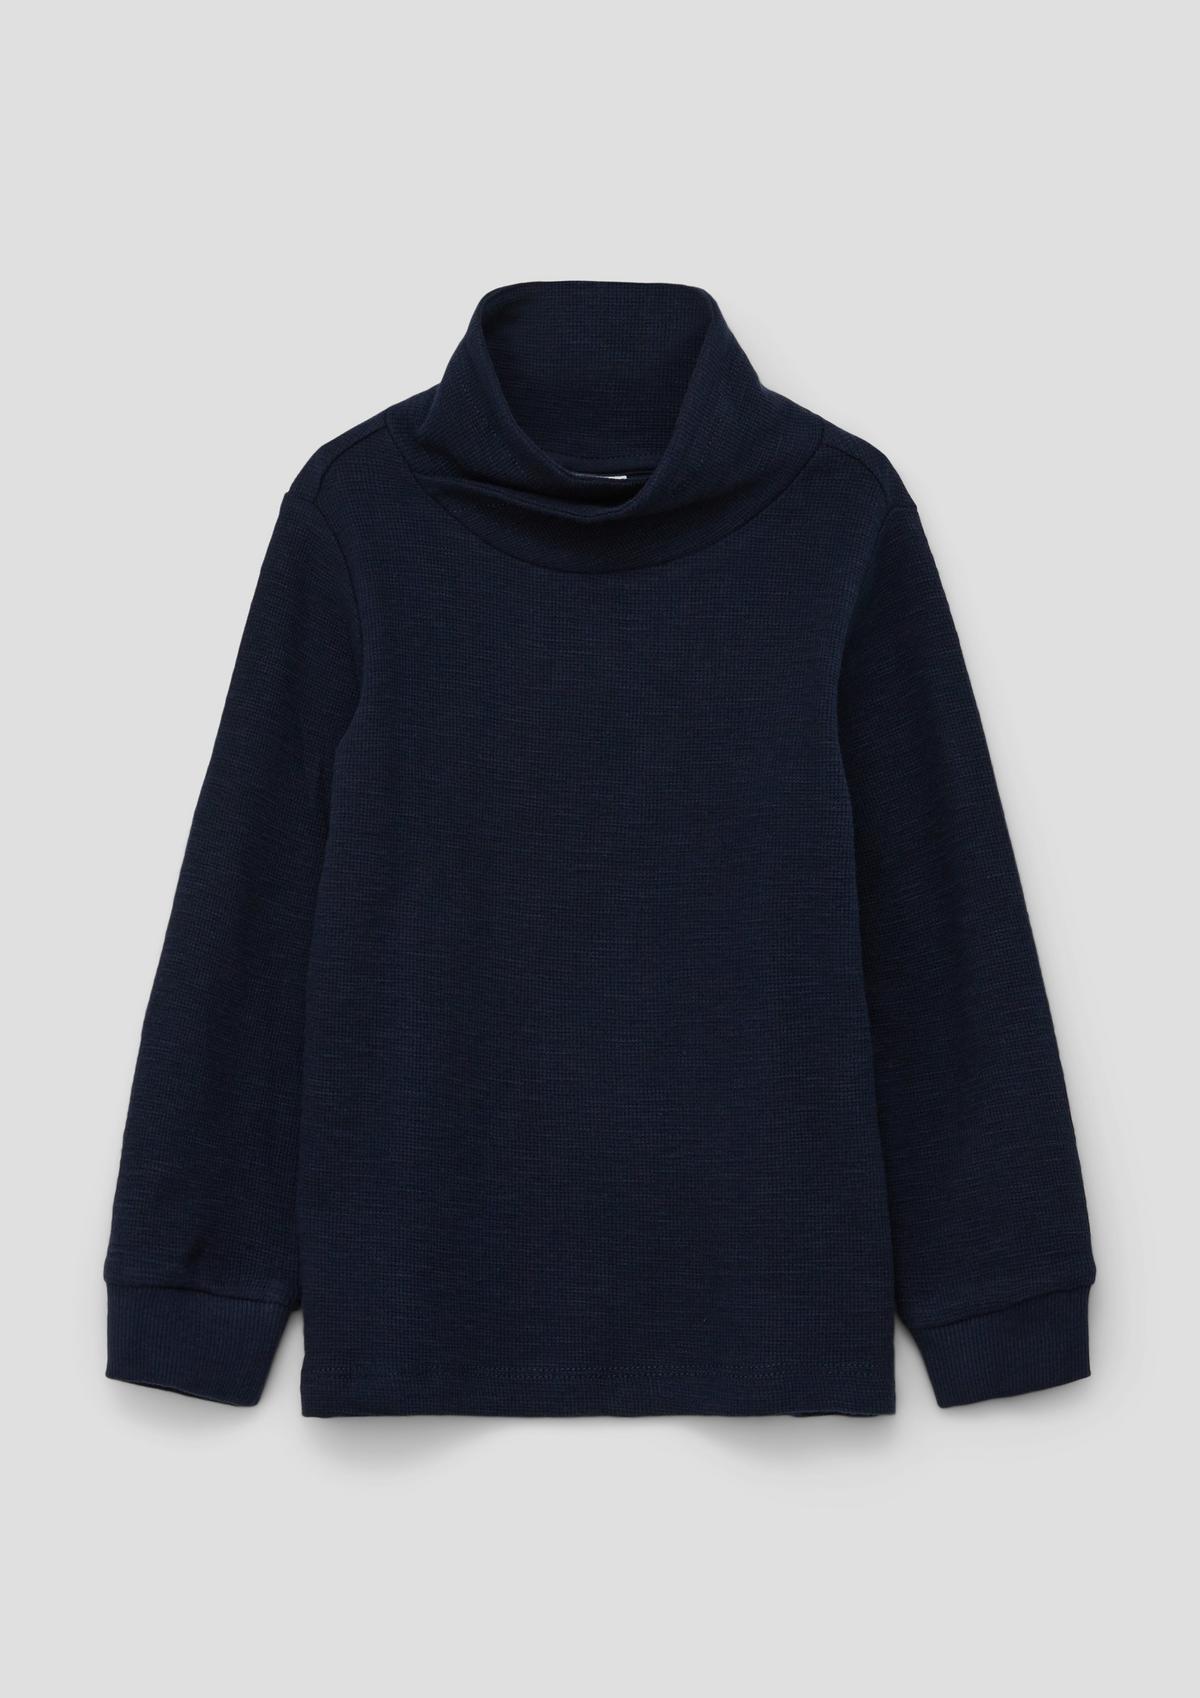 Long sleeve top with navy a - collar shawl